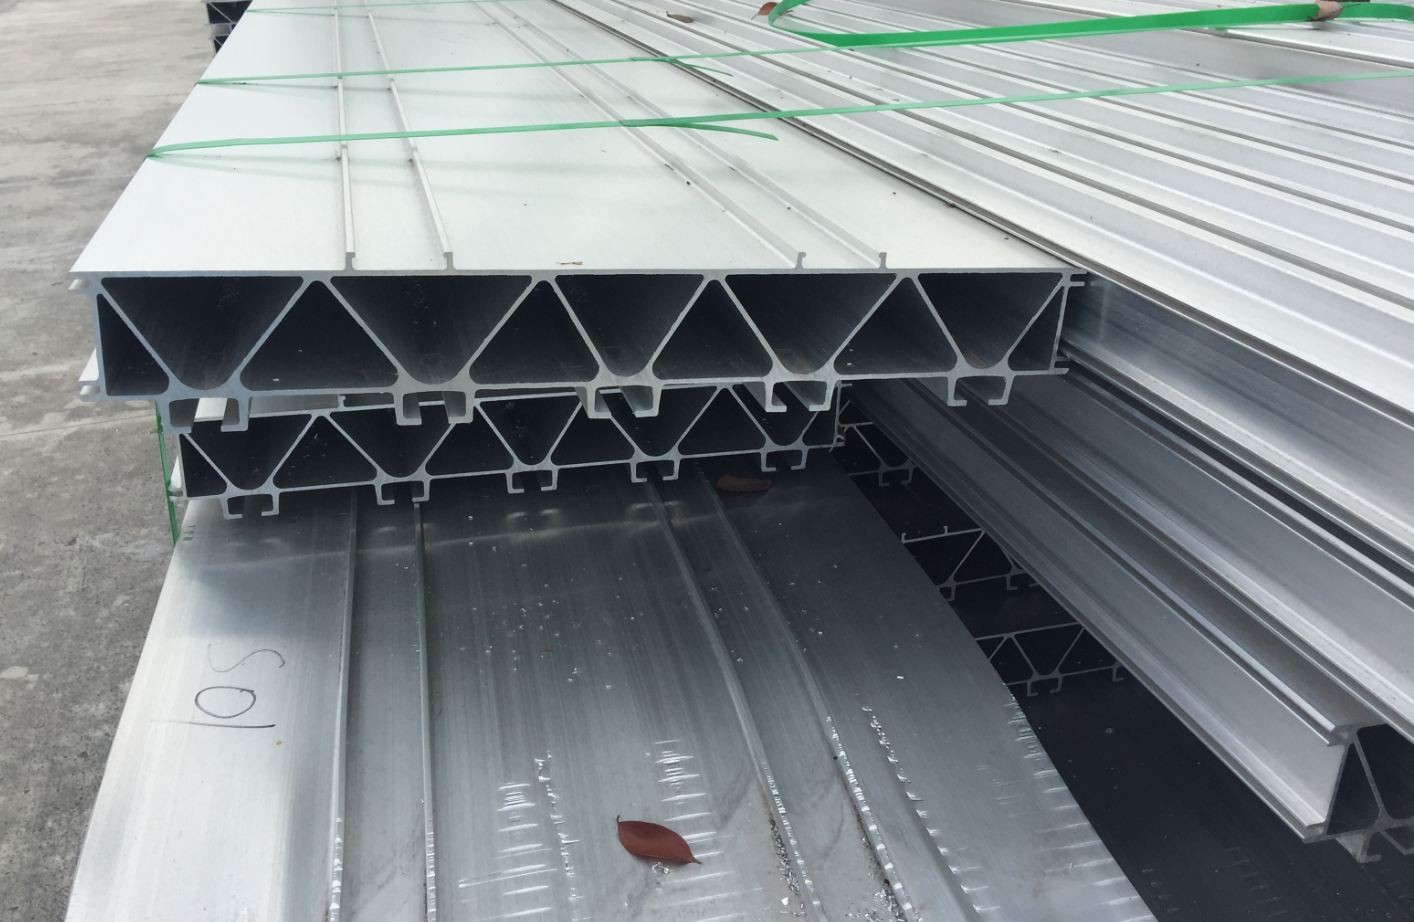 4.2M 6063 T6 Aluminium Extruded Profiles 16.8MM Wall Thickness Used As Subway Train'S Side Wall